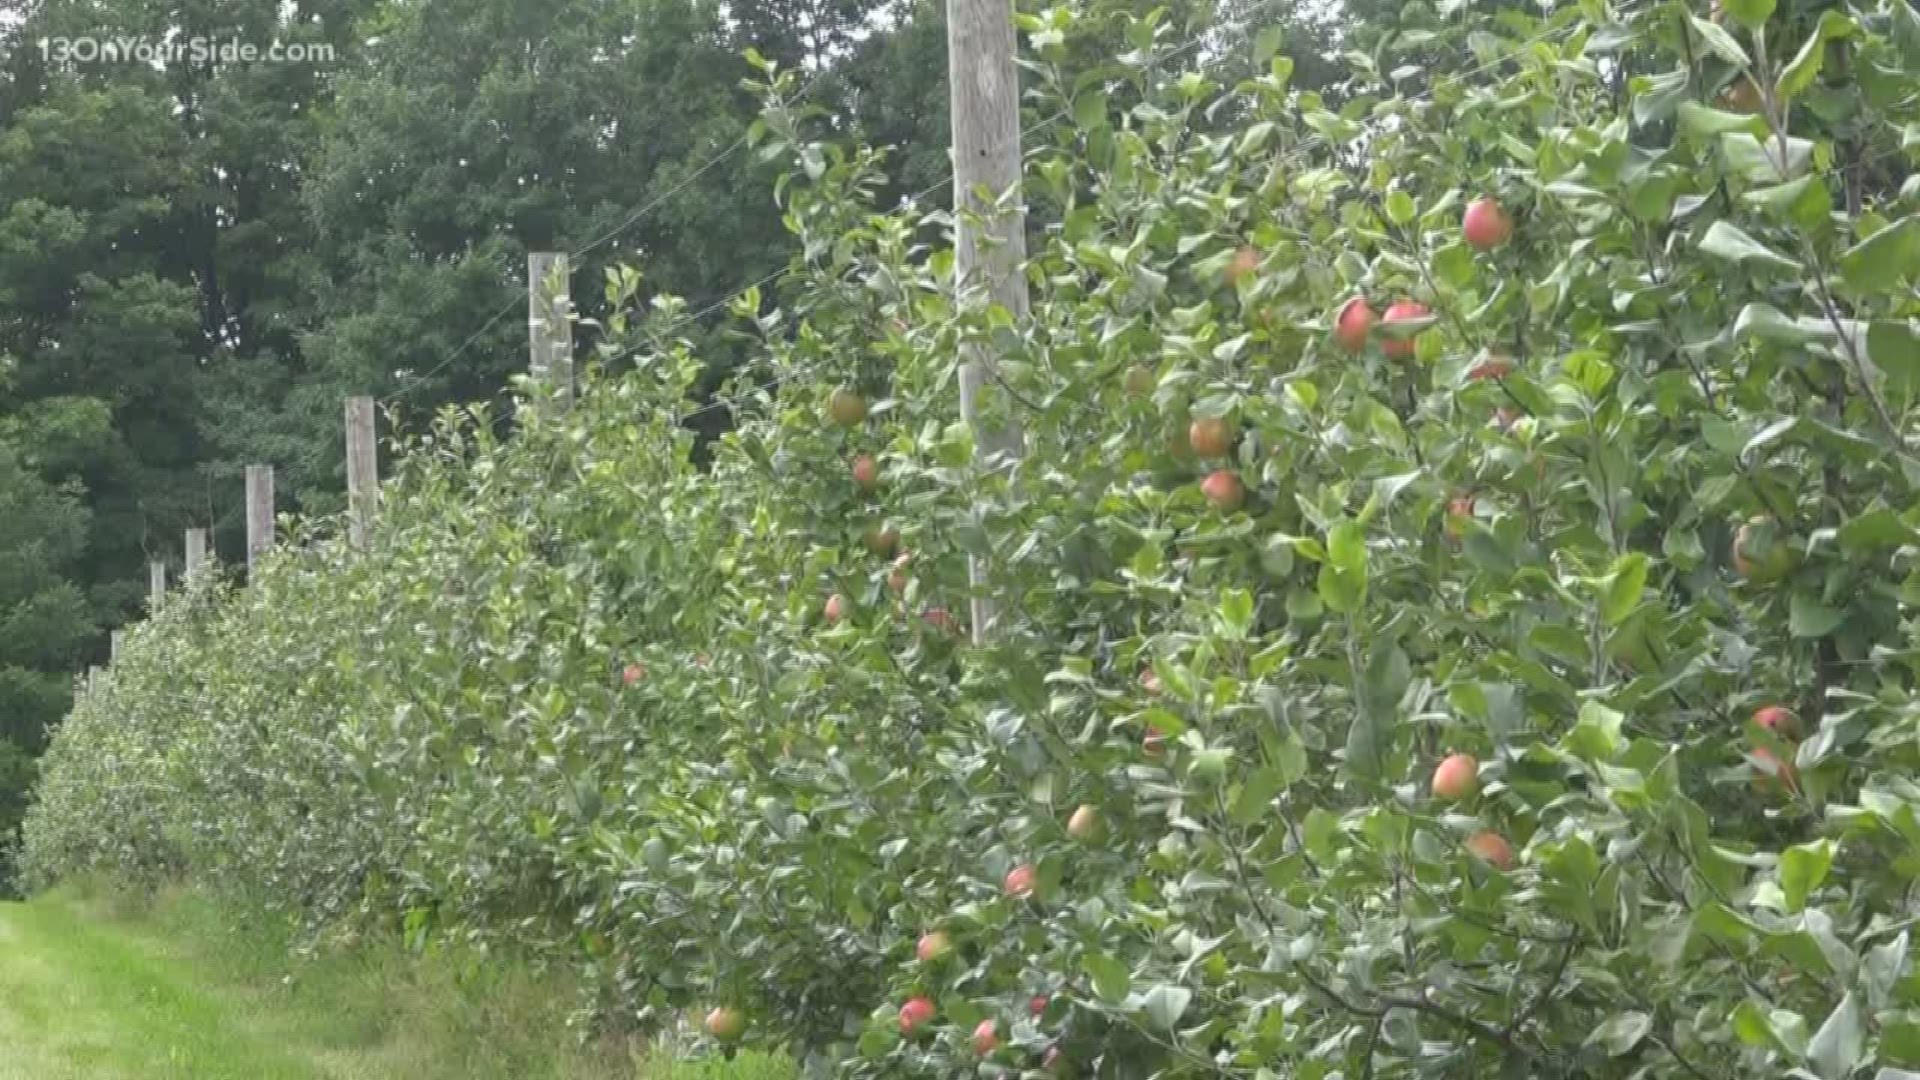 Michigan apple growers gearing up for a great harvest